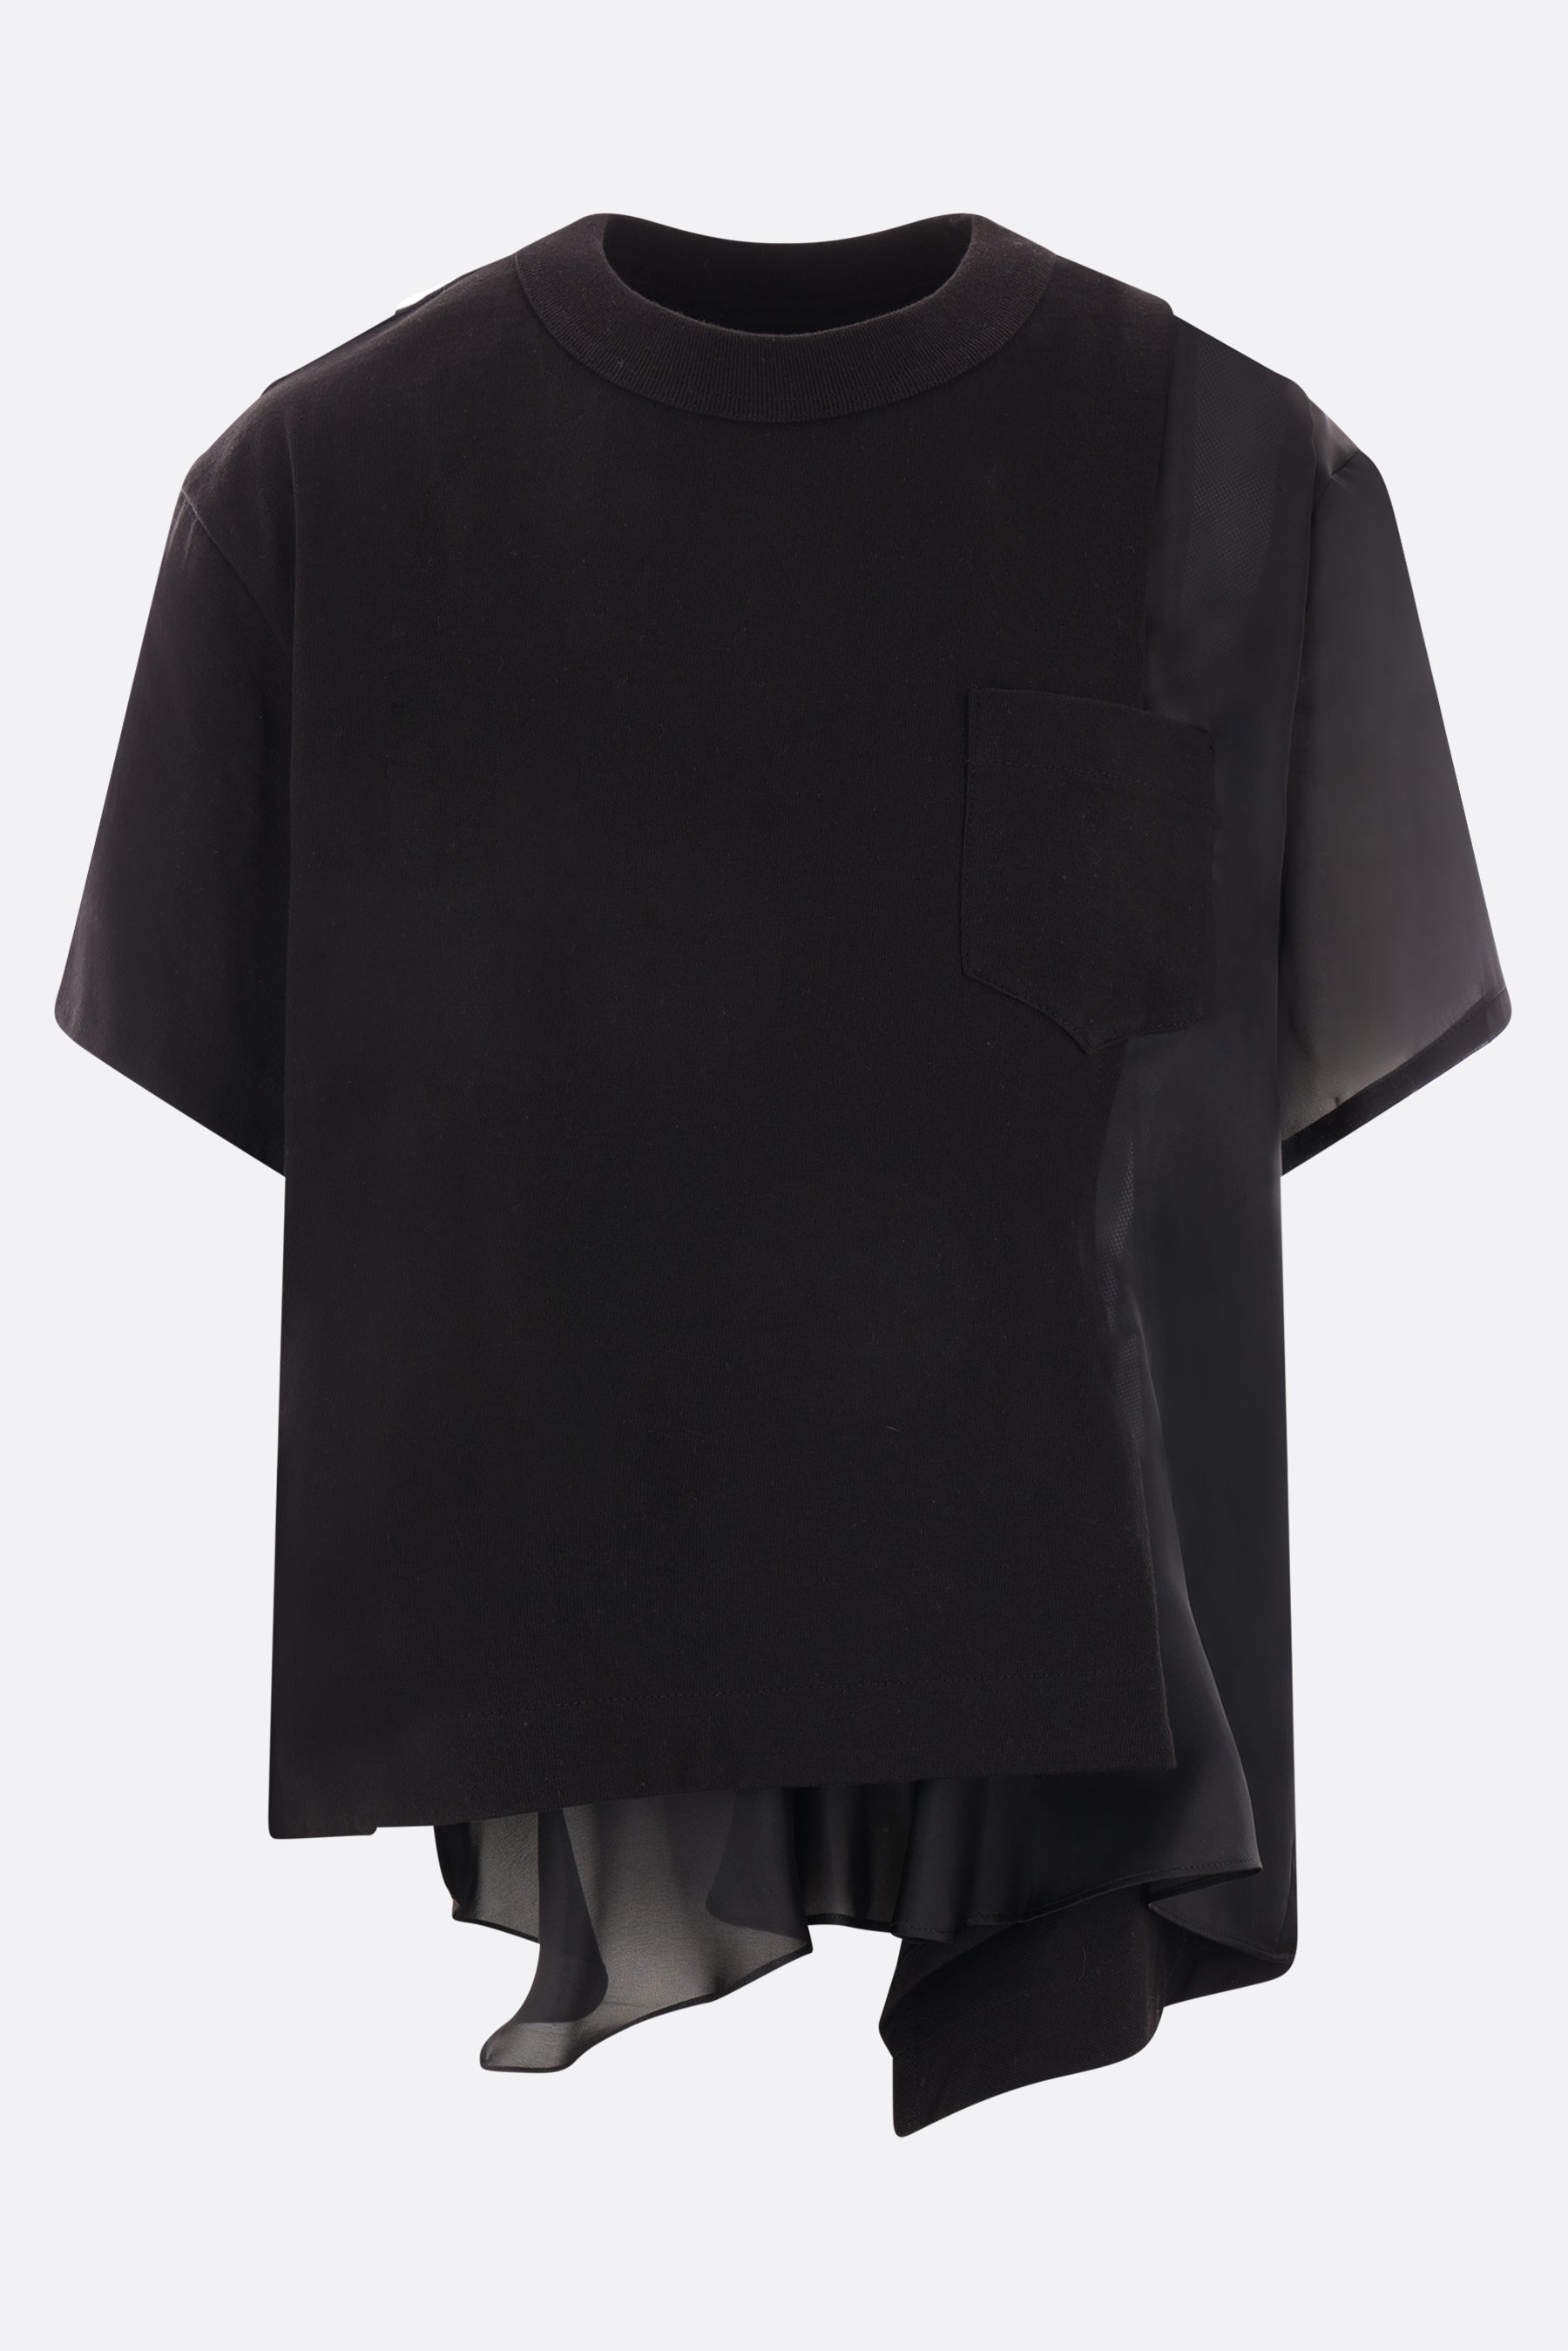 cotton and technical satin t-shirt